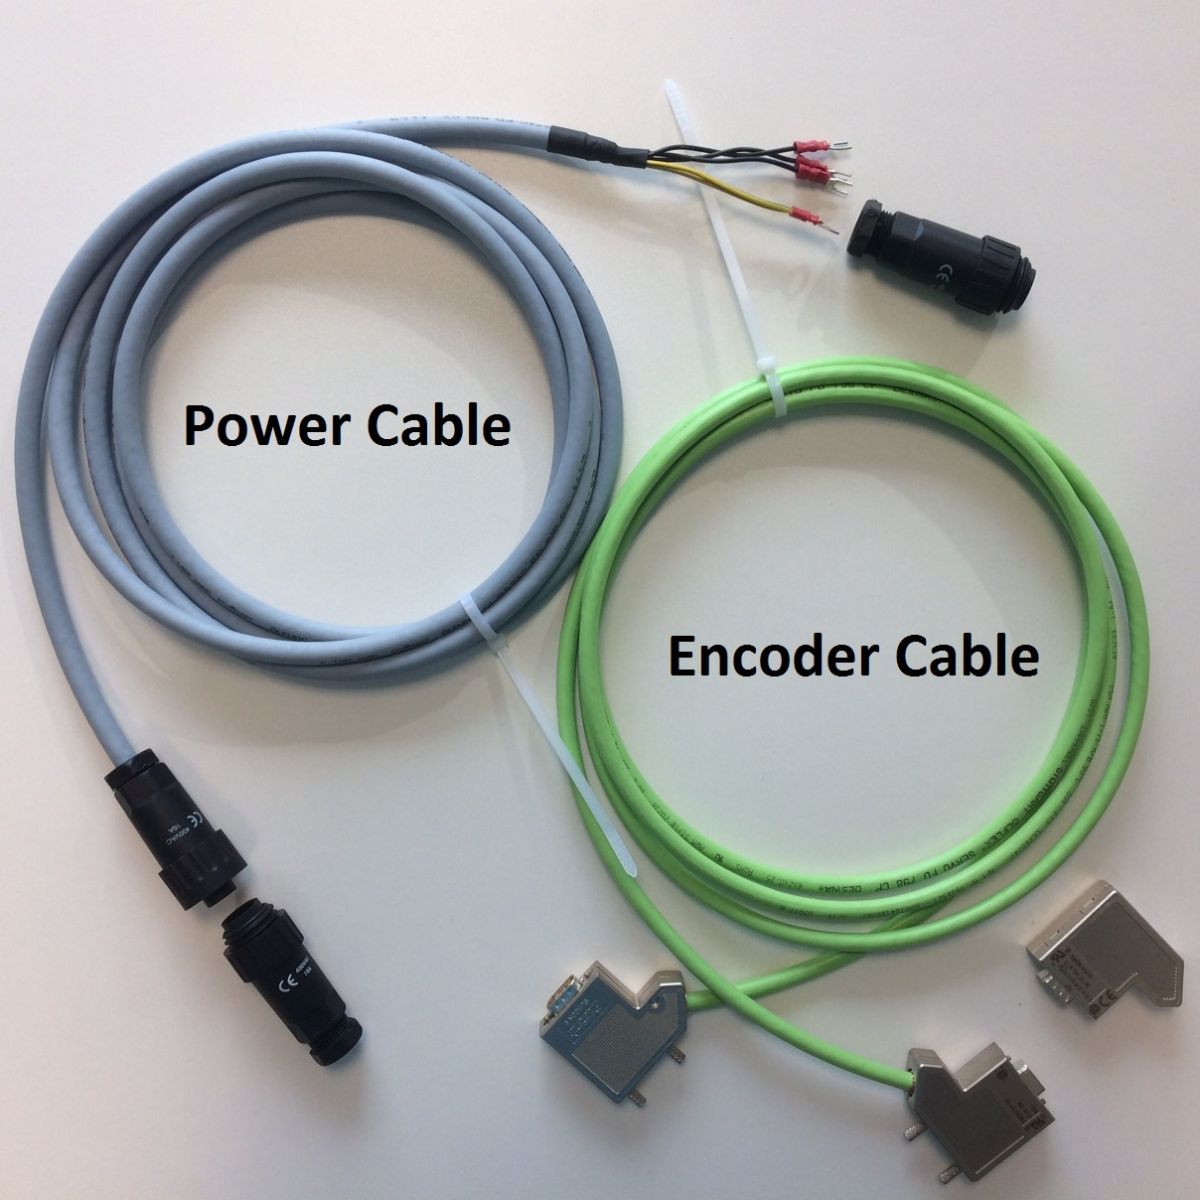 3m acservo or closedloopstepper cable sets power encoder